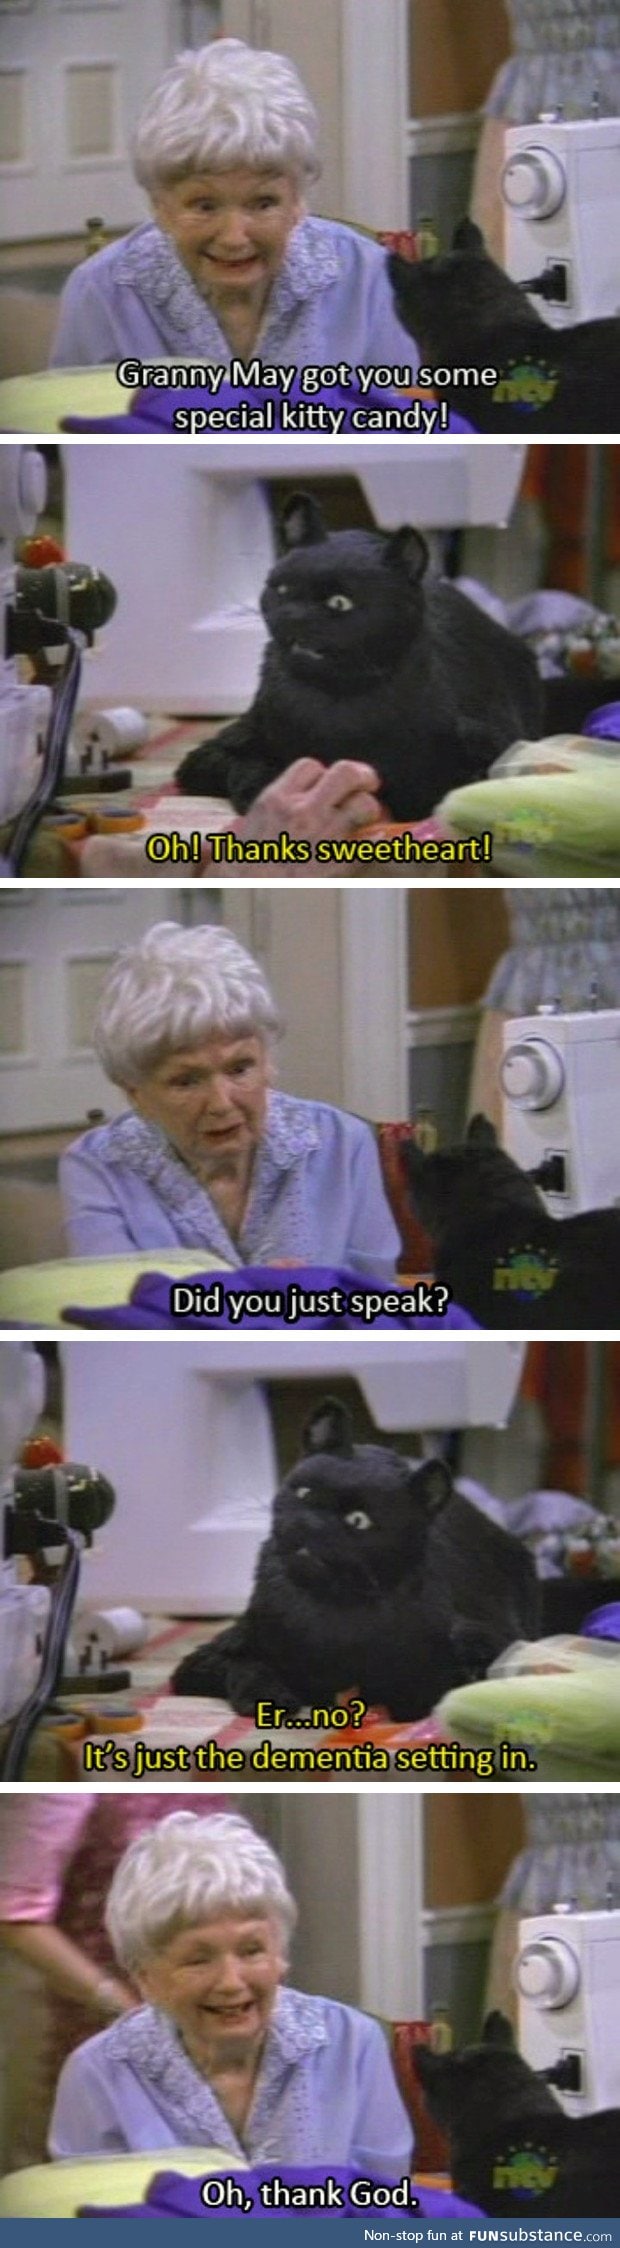 Salem from Sabrina the Teenage Witch had no chill